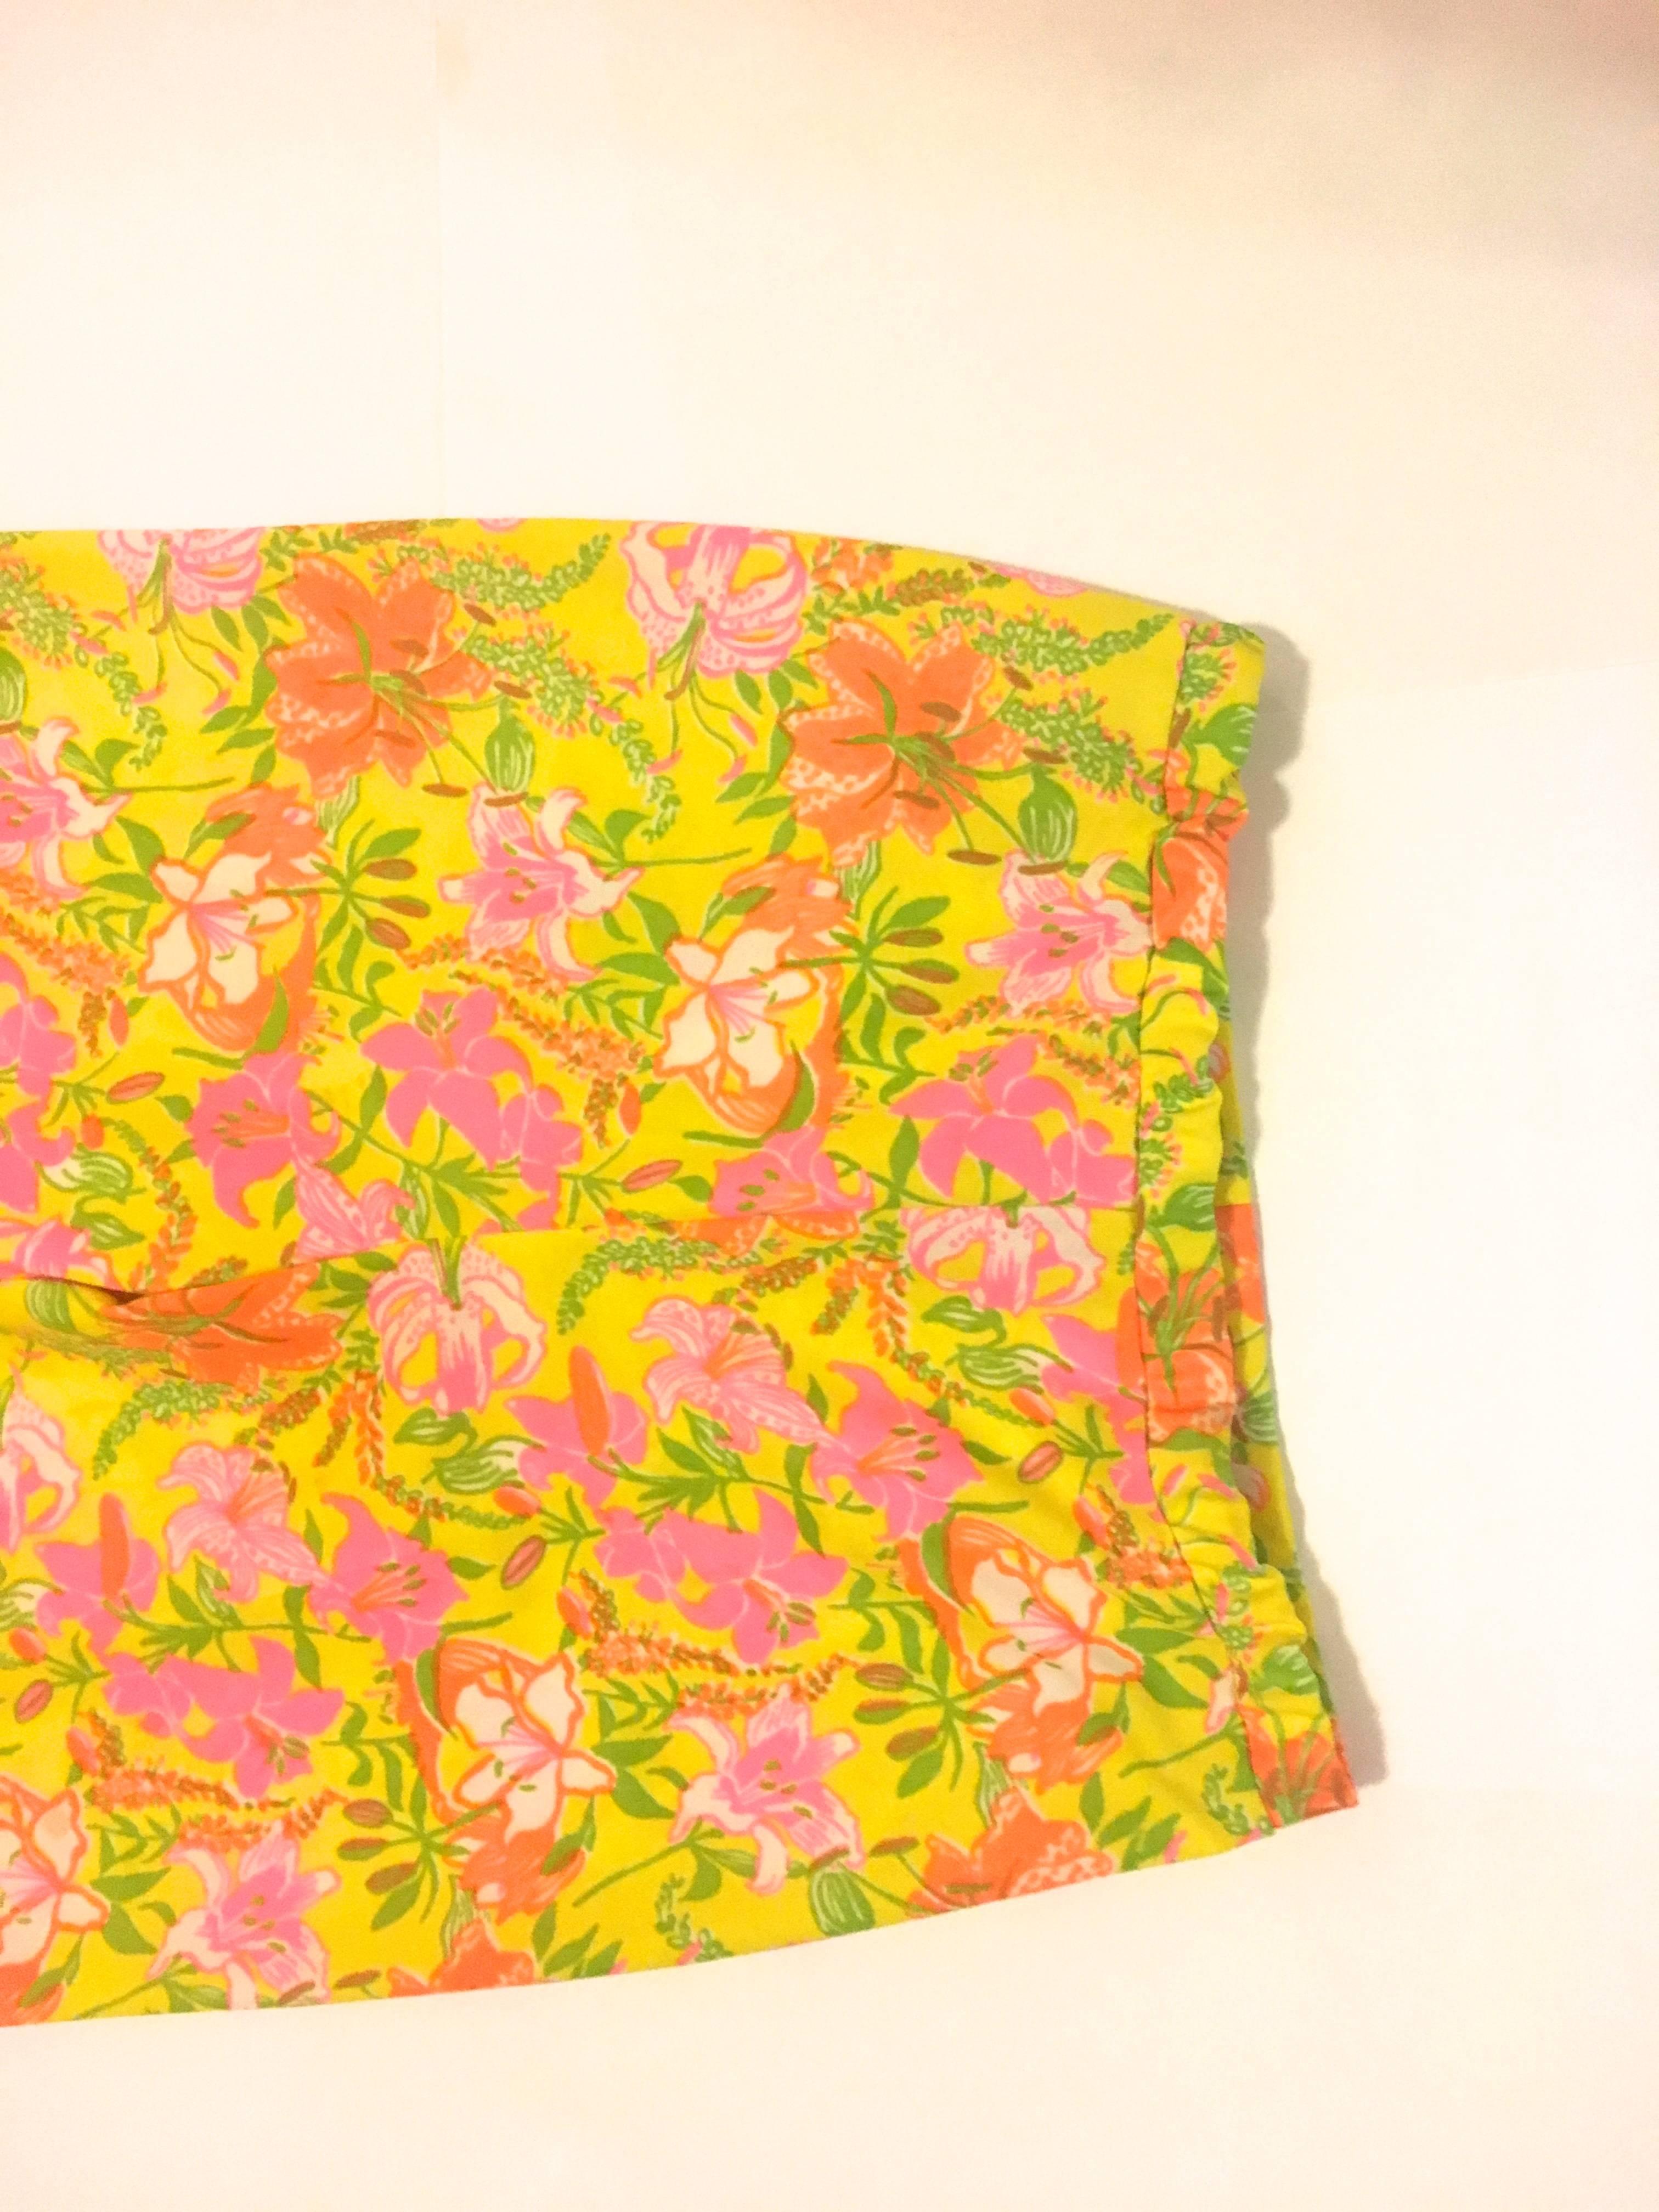 Rare Lilly Pulitzer Pull-up Pants - Late 1960's In Excellent Condition For Sale In Boca Raton, FL